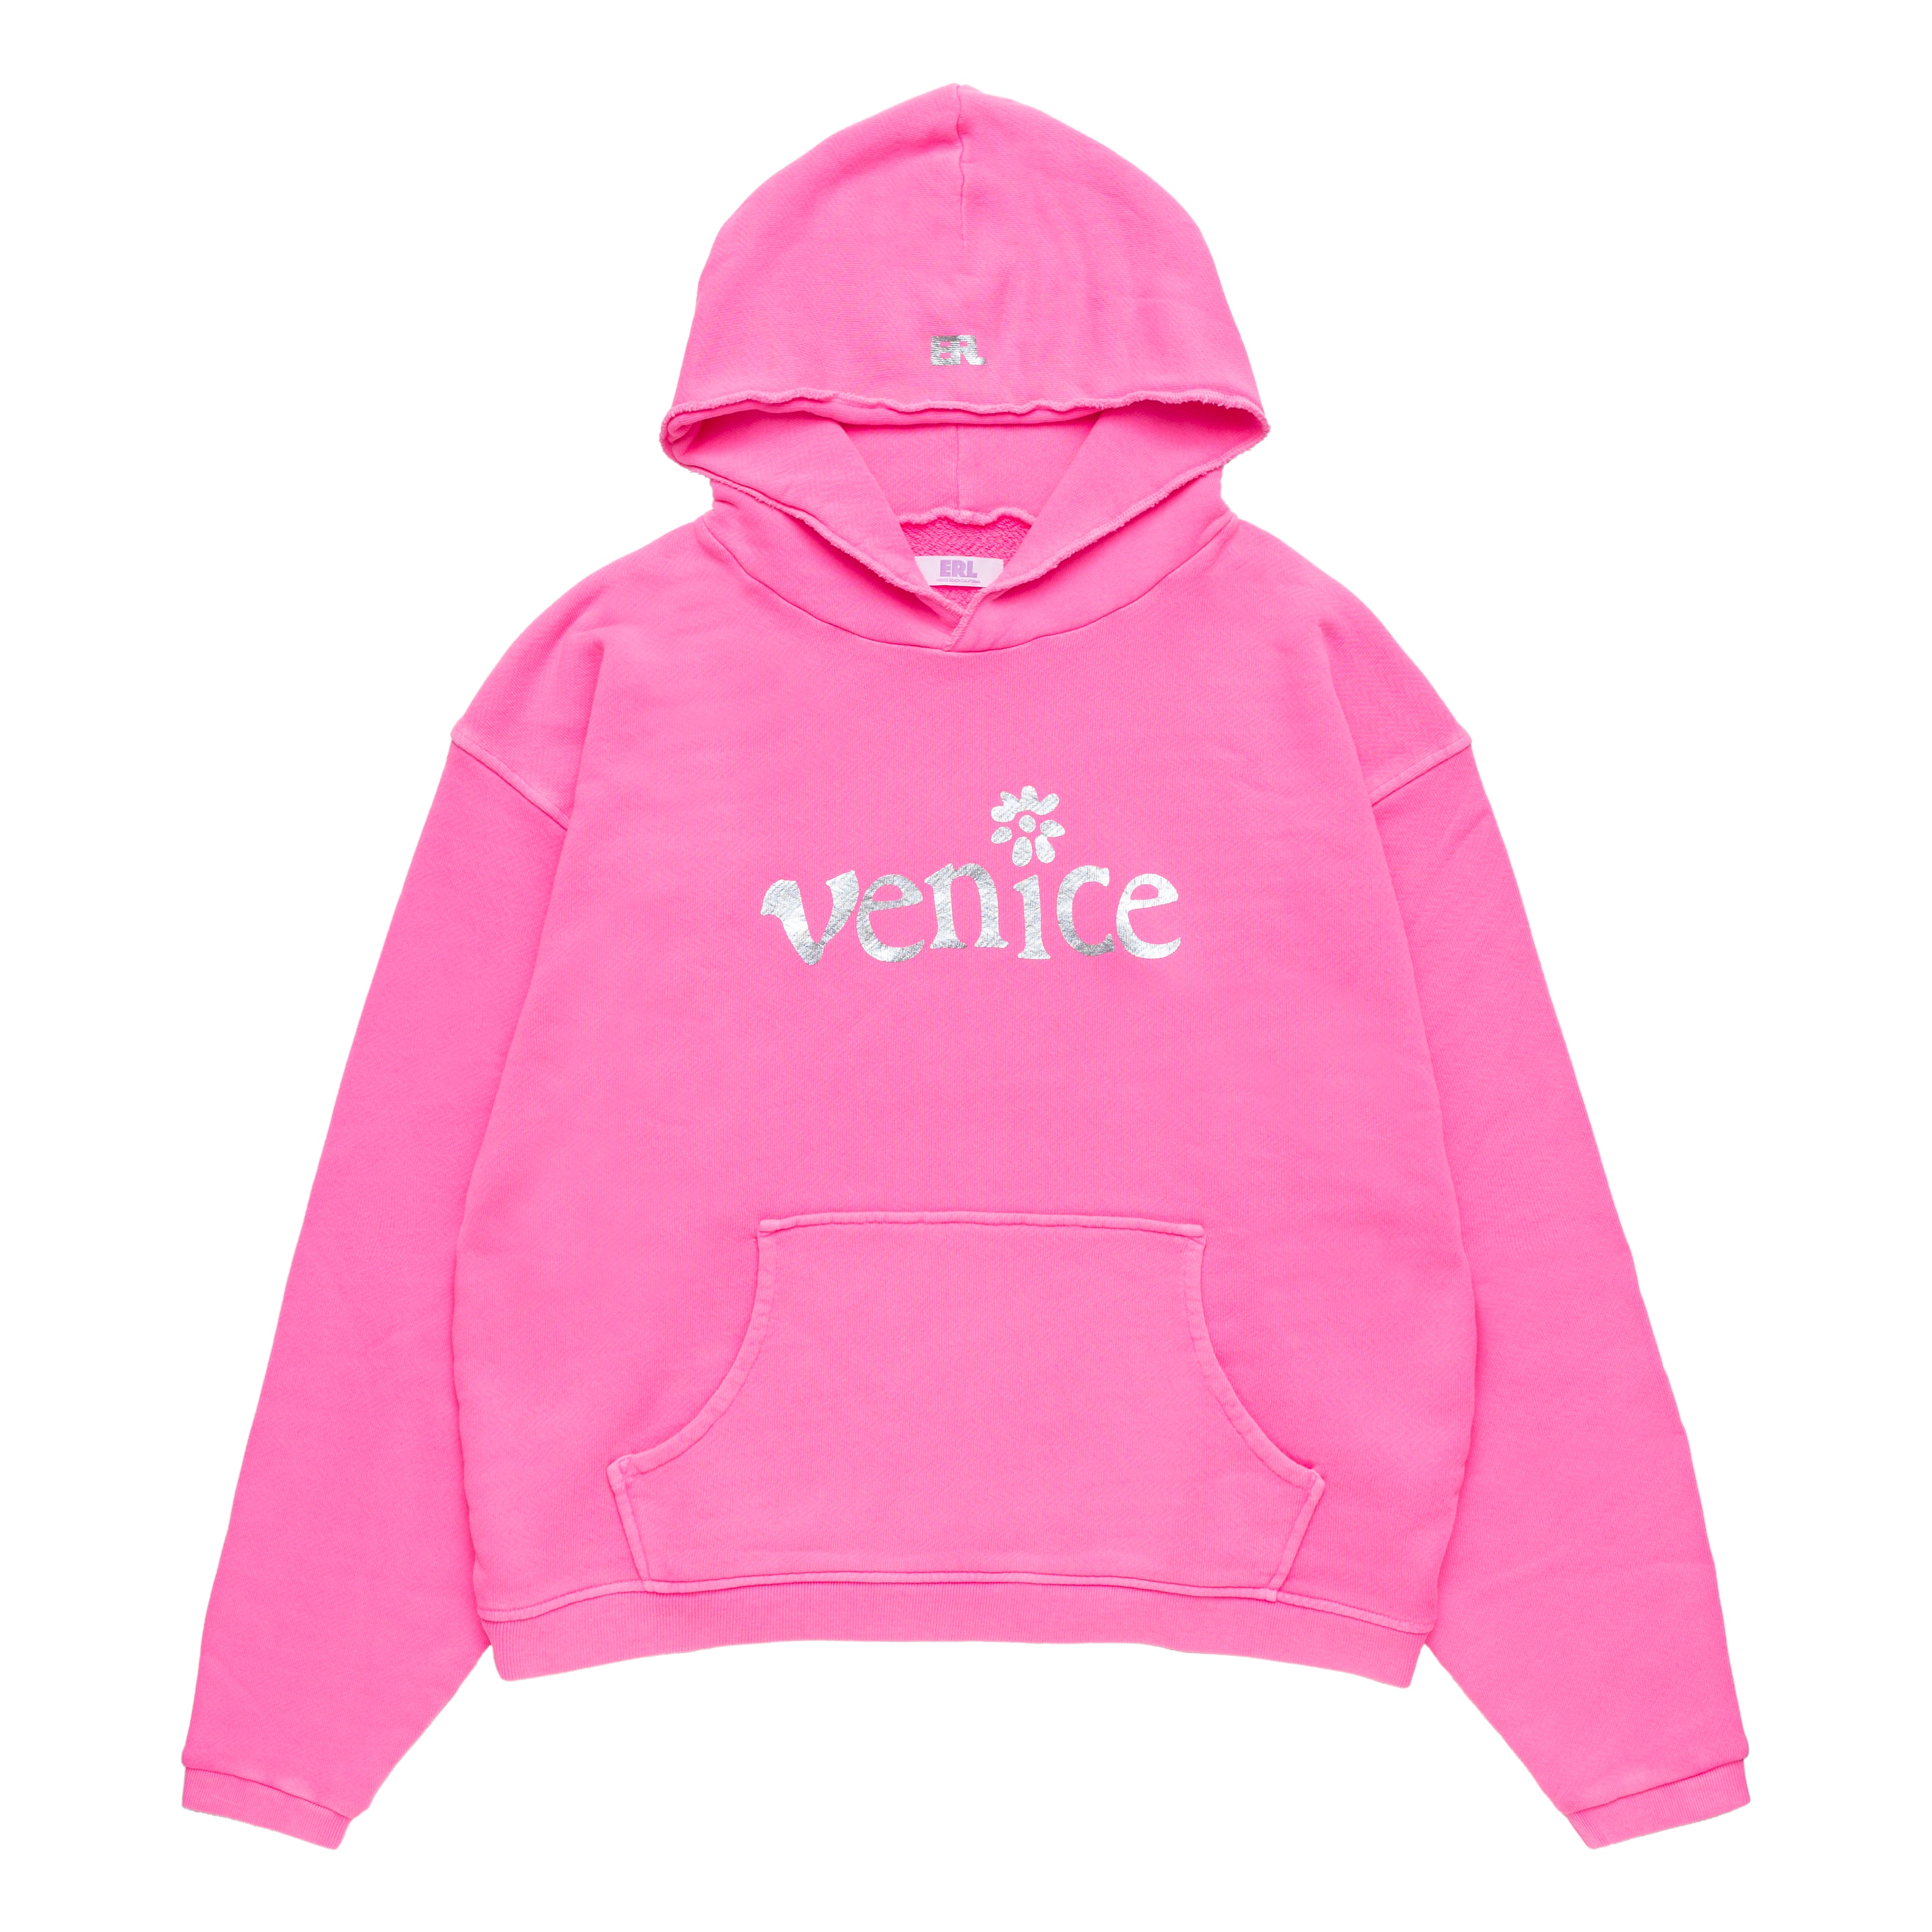 ERL - Unisex Silver Printed Venice Hoodie Knit - (Pink )